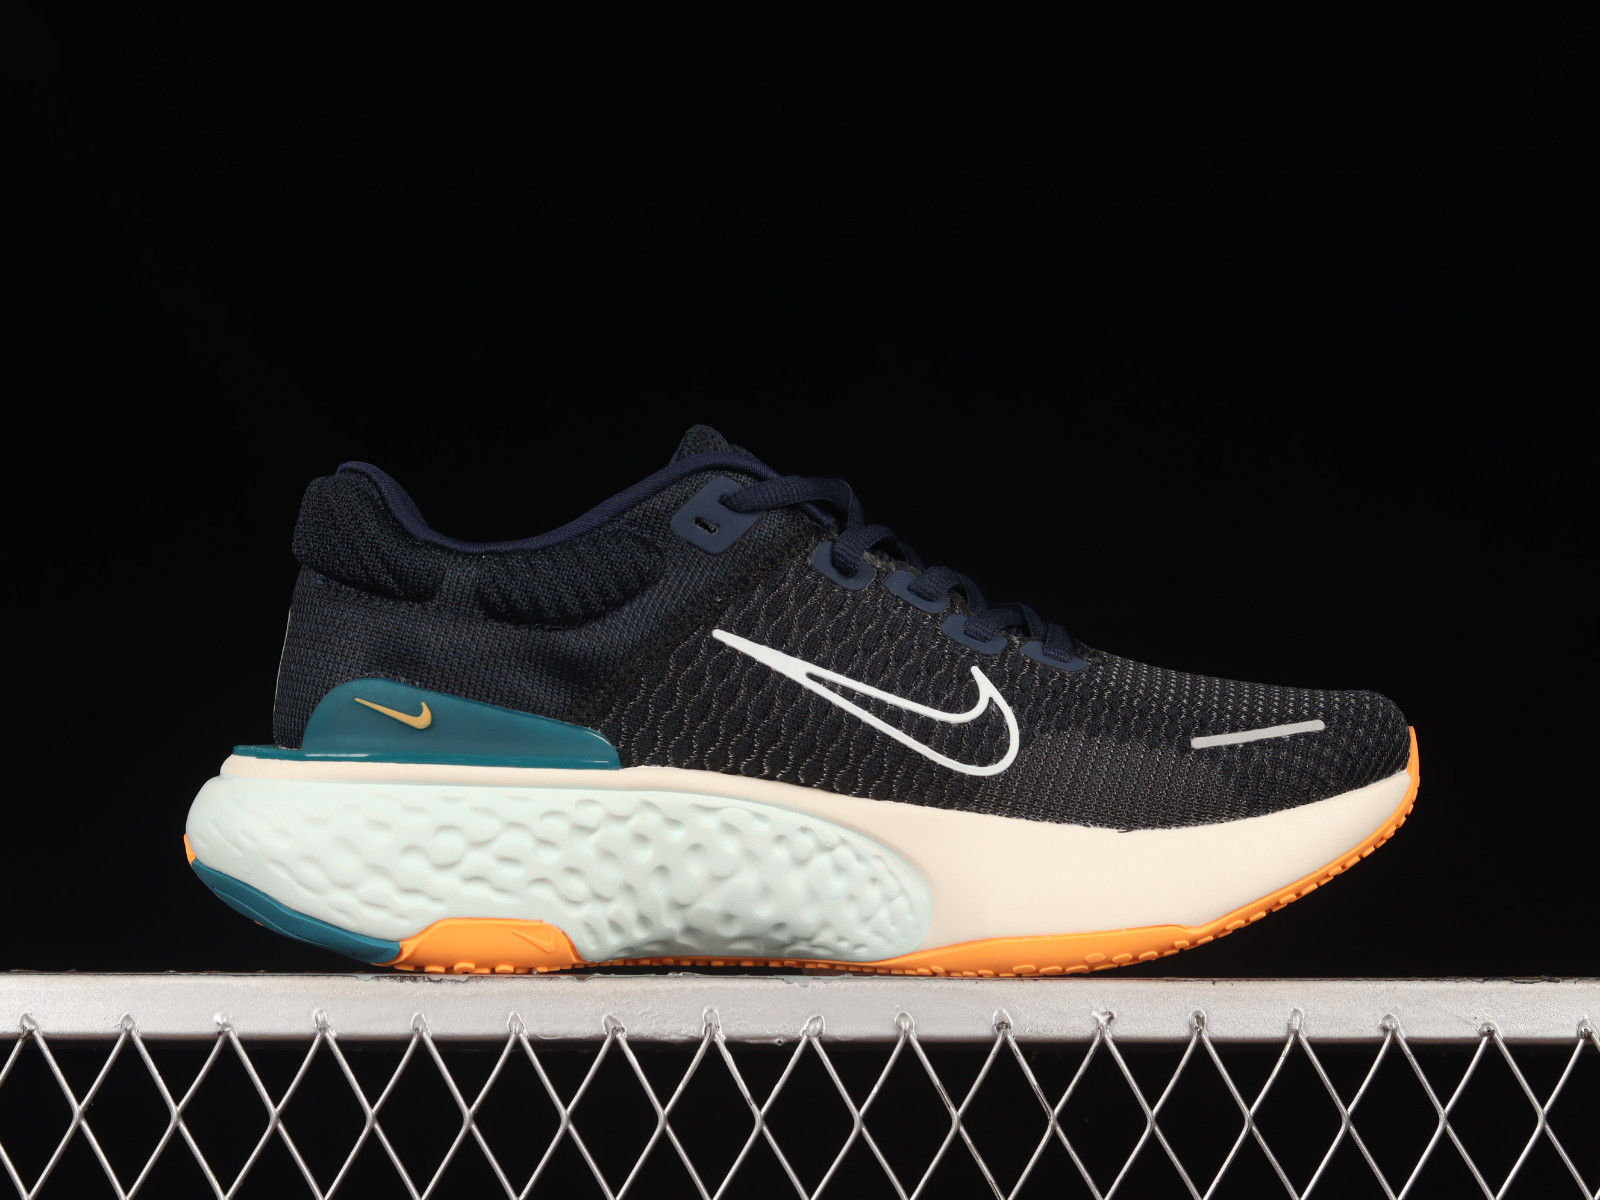 400 Nike ZoomX Invincible Run 2 Obsidian Barely Green DH5425 - GmarShops - nike roshe run red sail classic